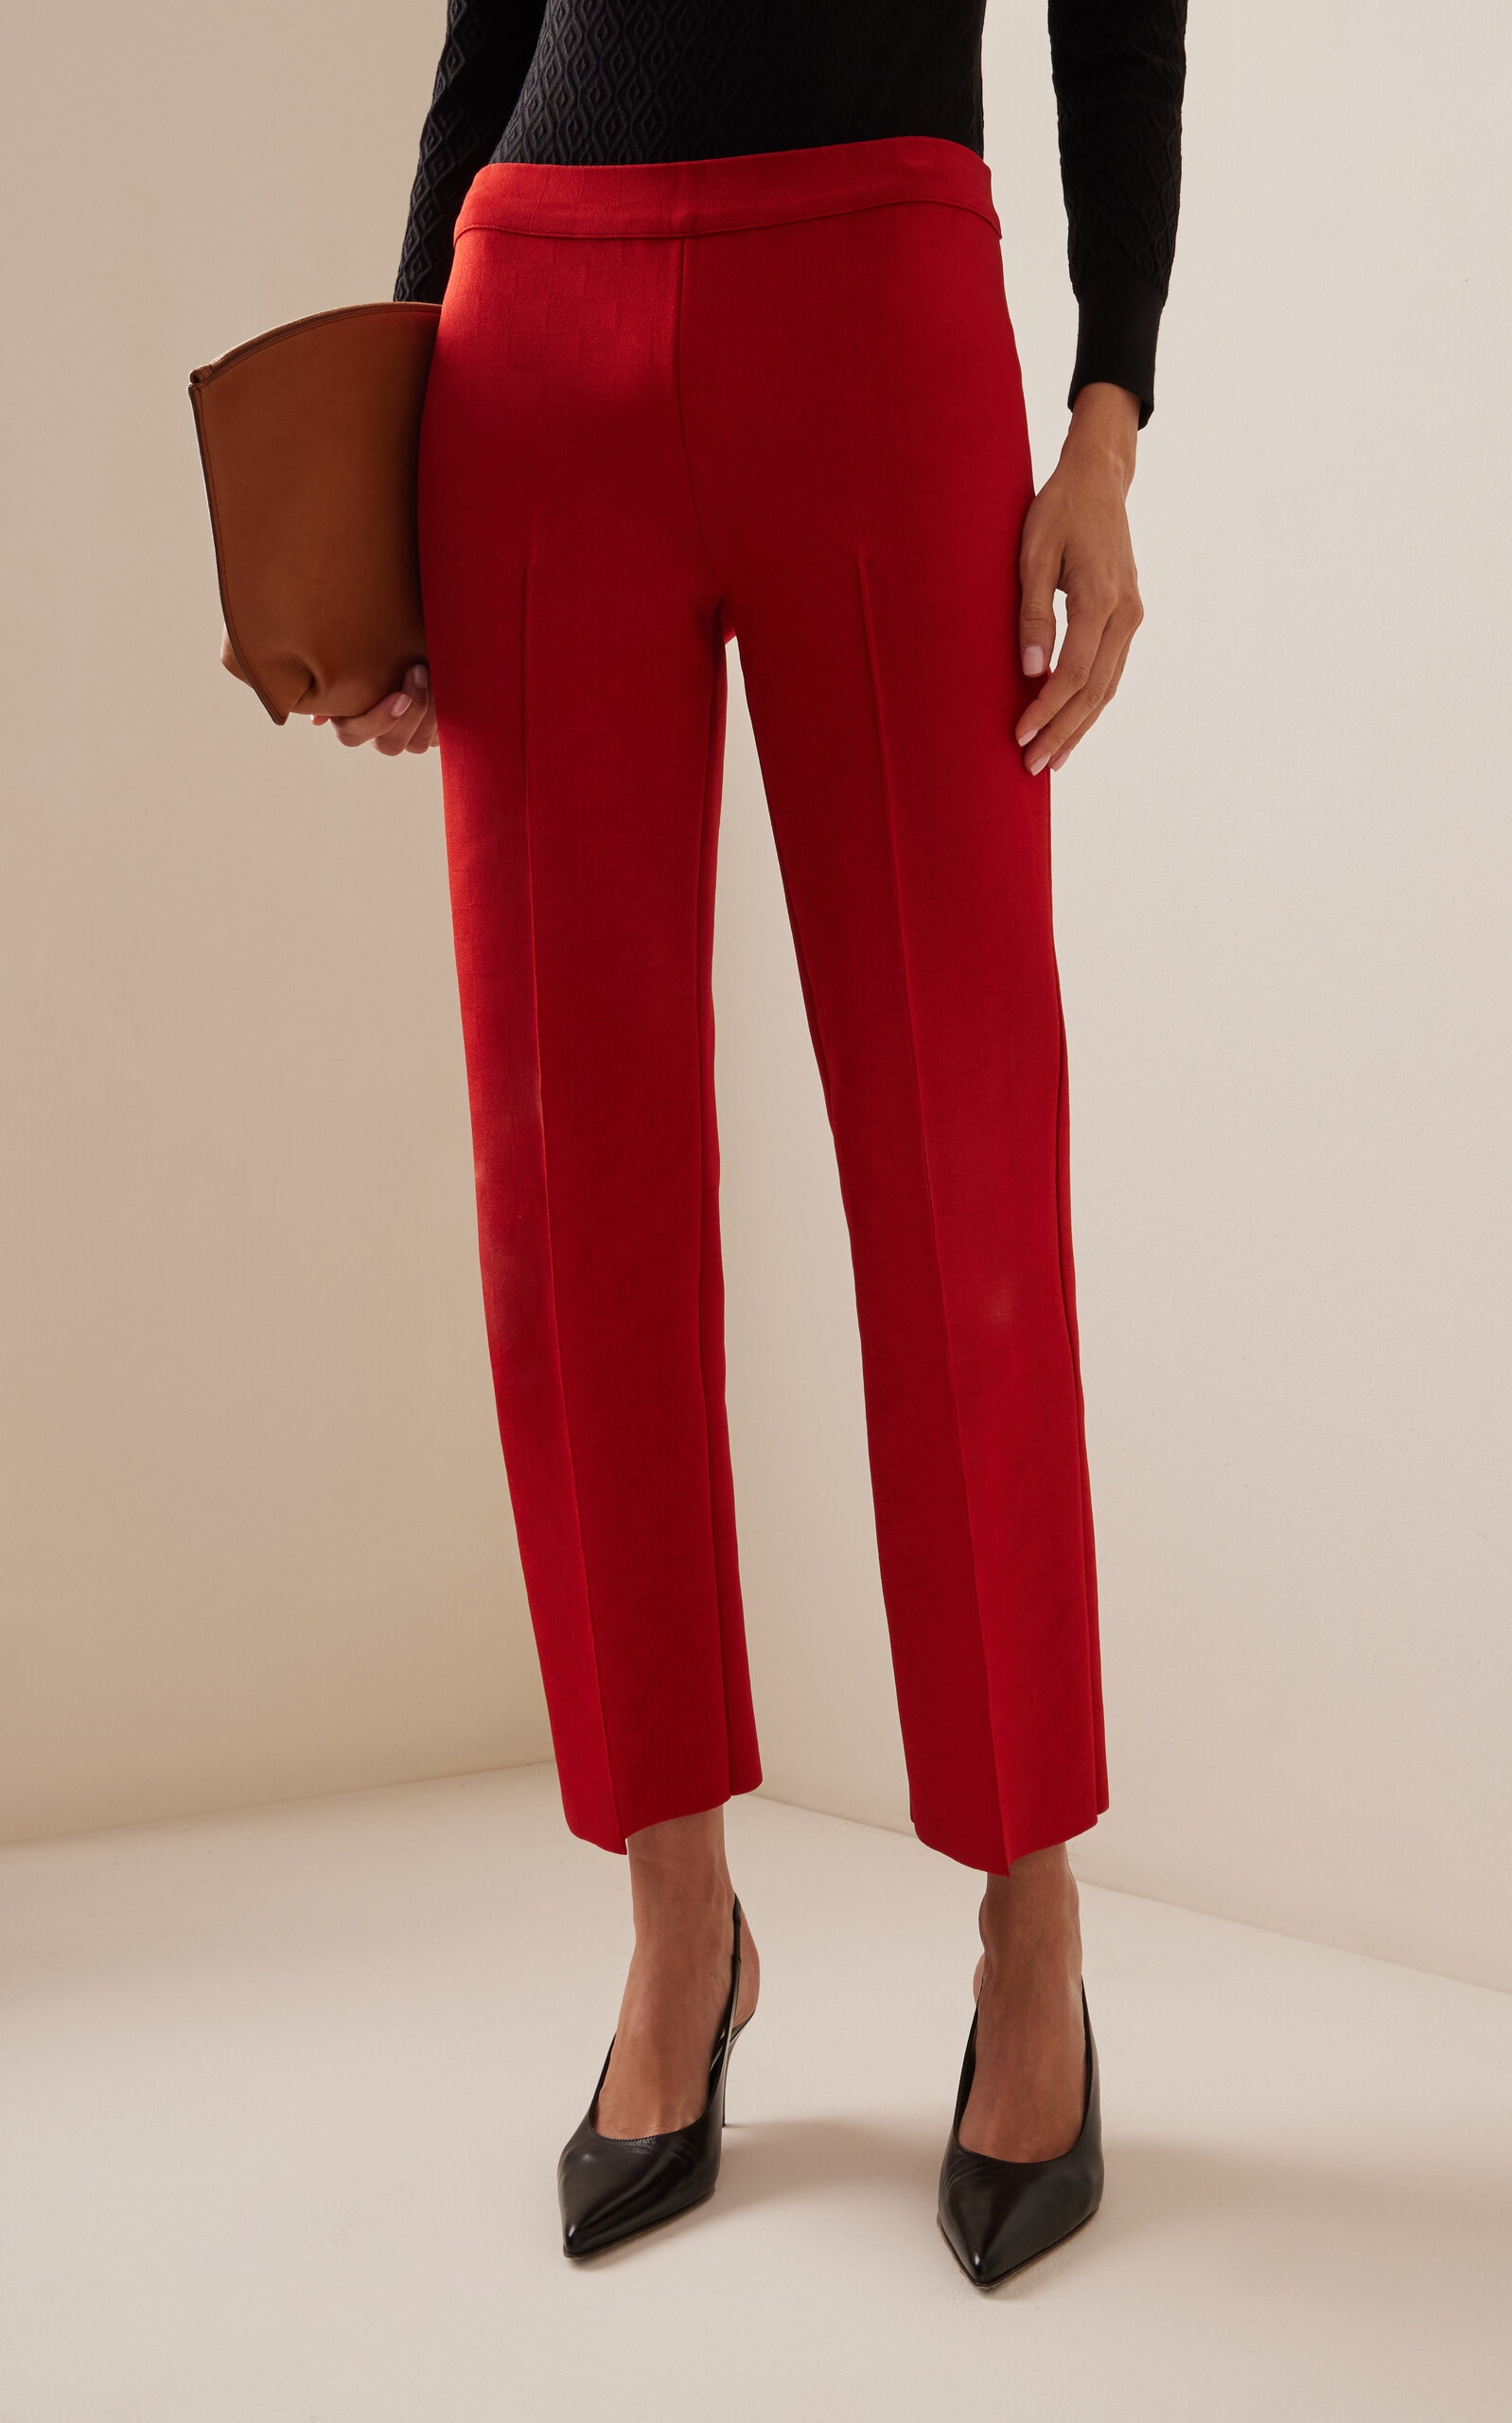 NSFW Jules Stretch Knit Pants red - 4